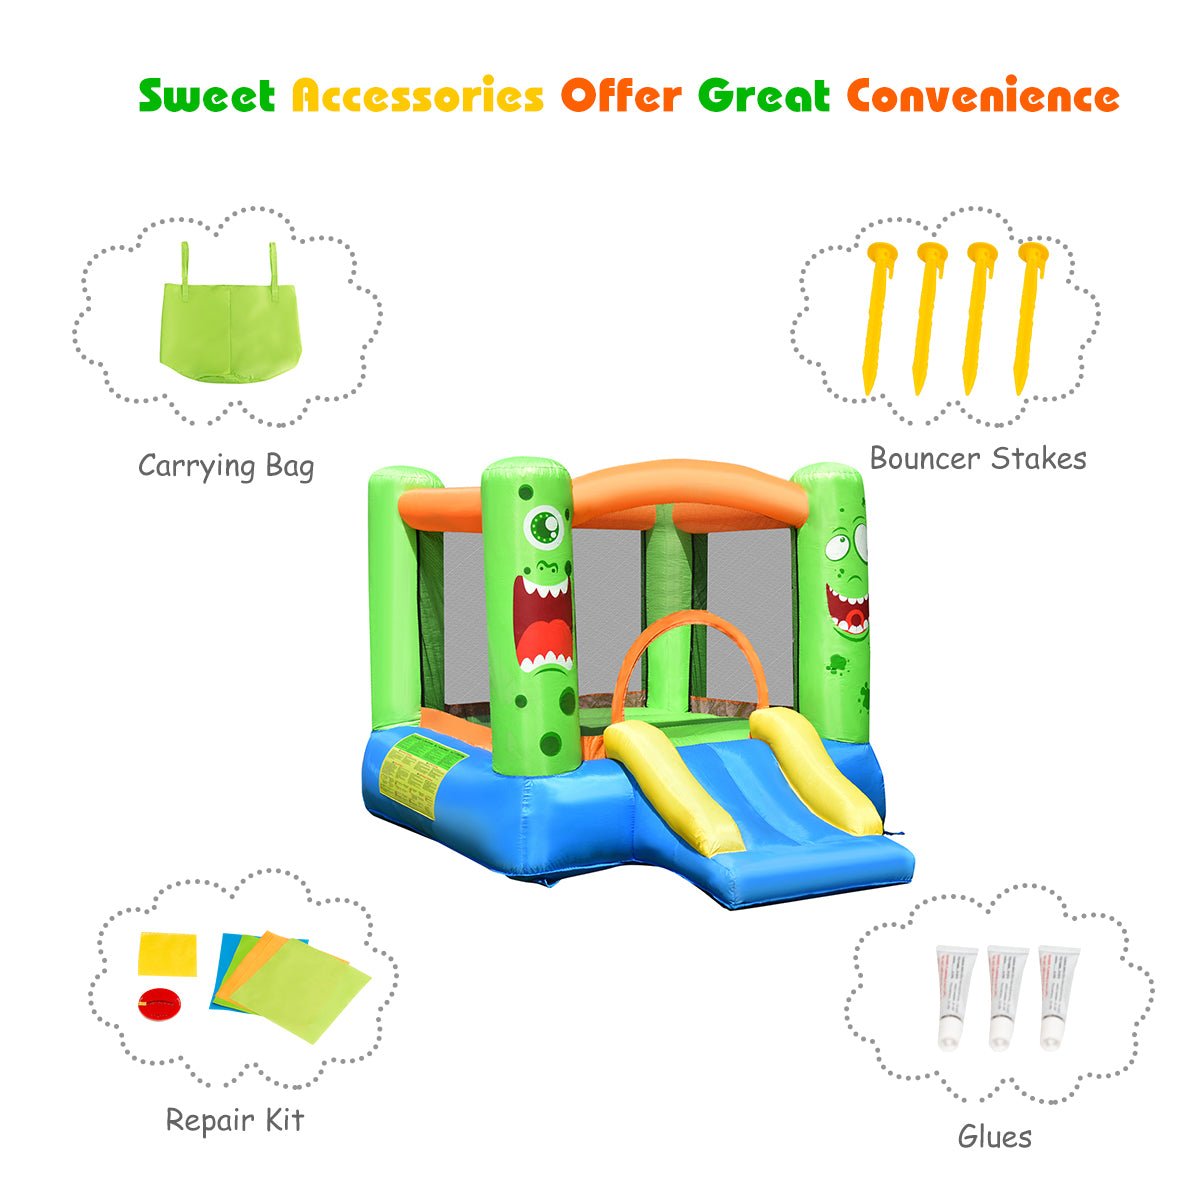 Energetic Adventures: Inflatable Bounce Playhouse with Slide & Basketball for Kids